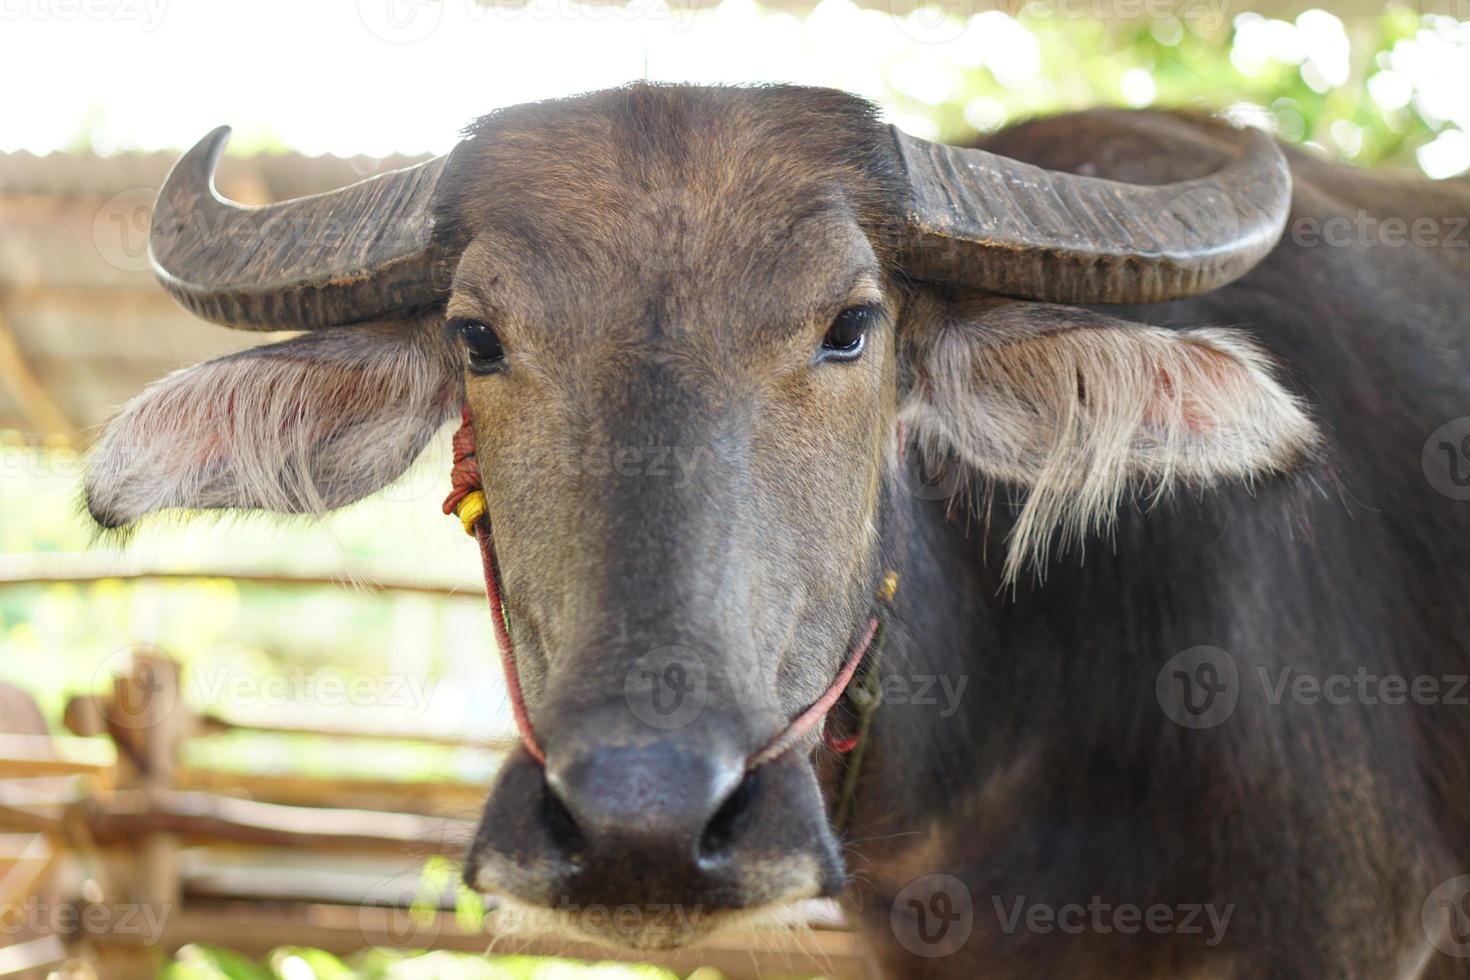 Thai buffalo in a wooden stall photo